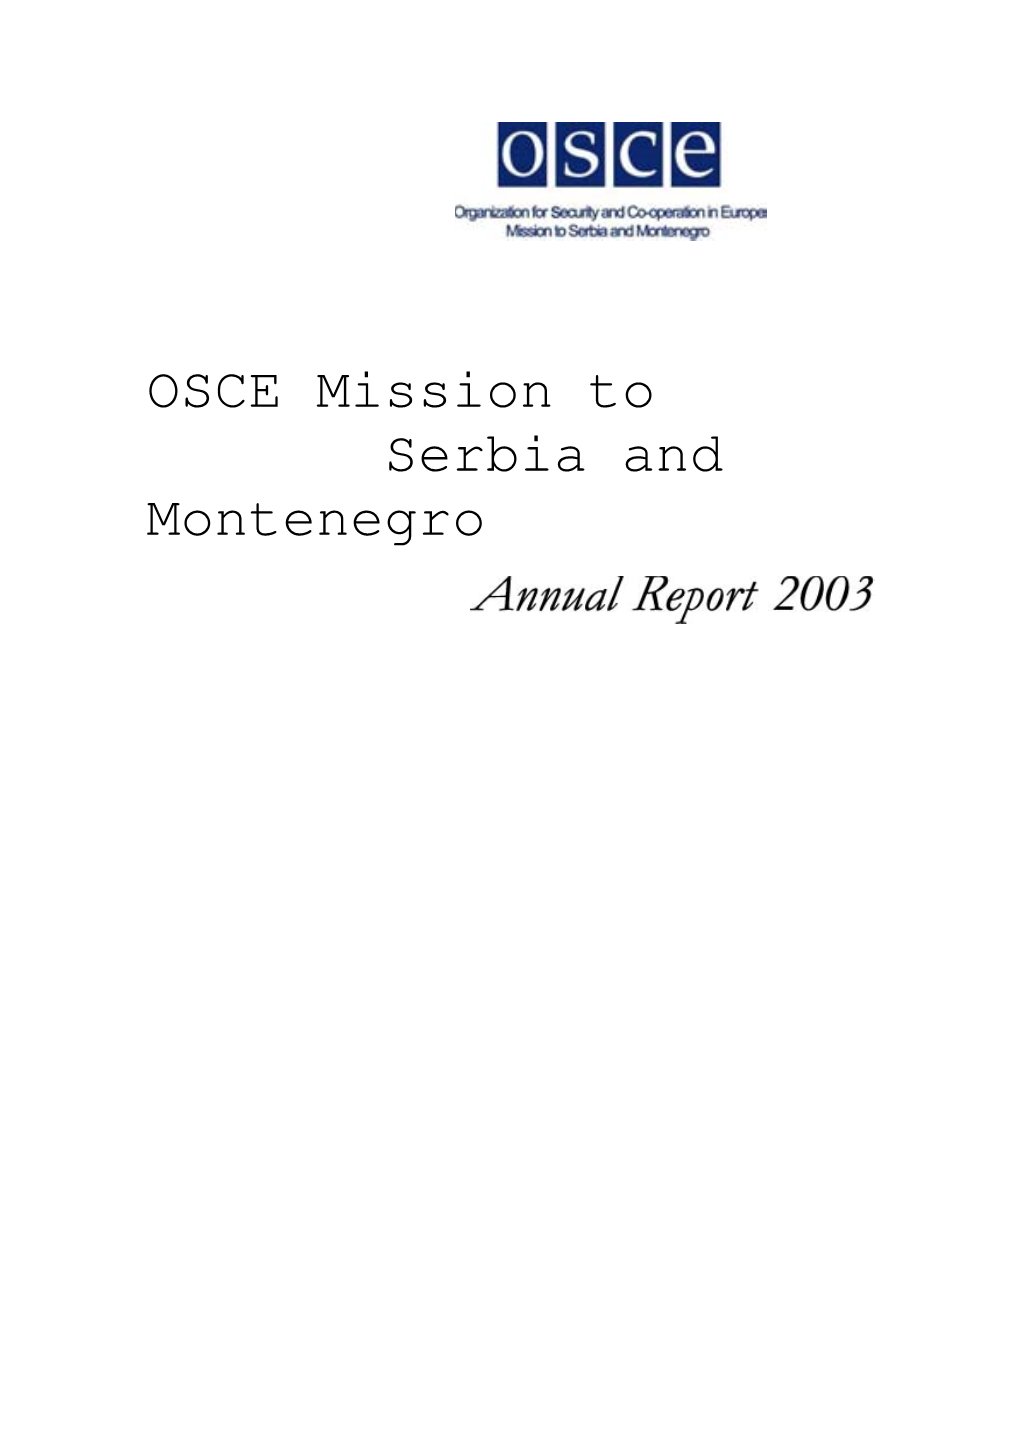 OSCE Mission to Serbia and Montenegro